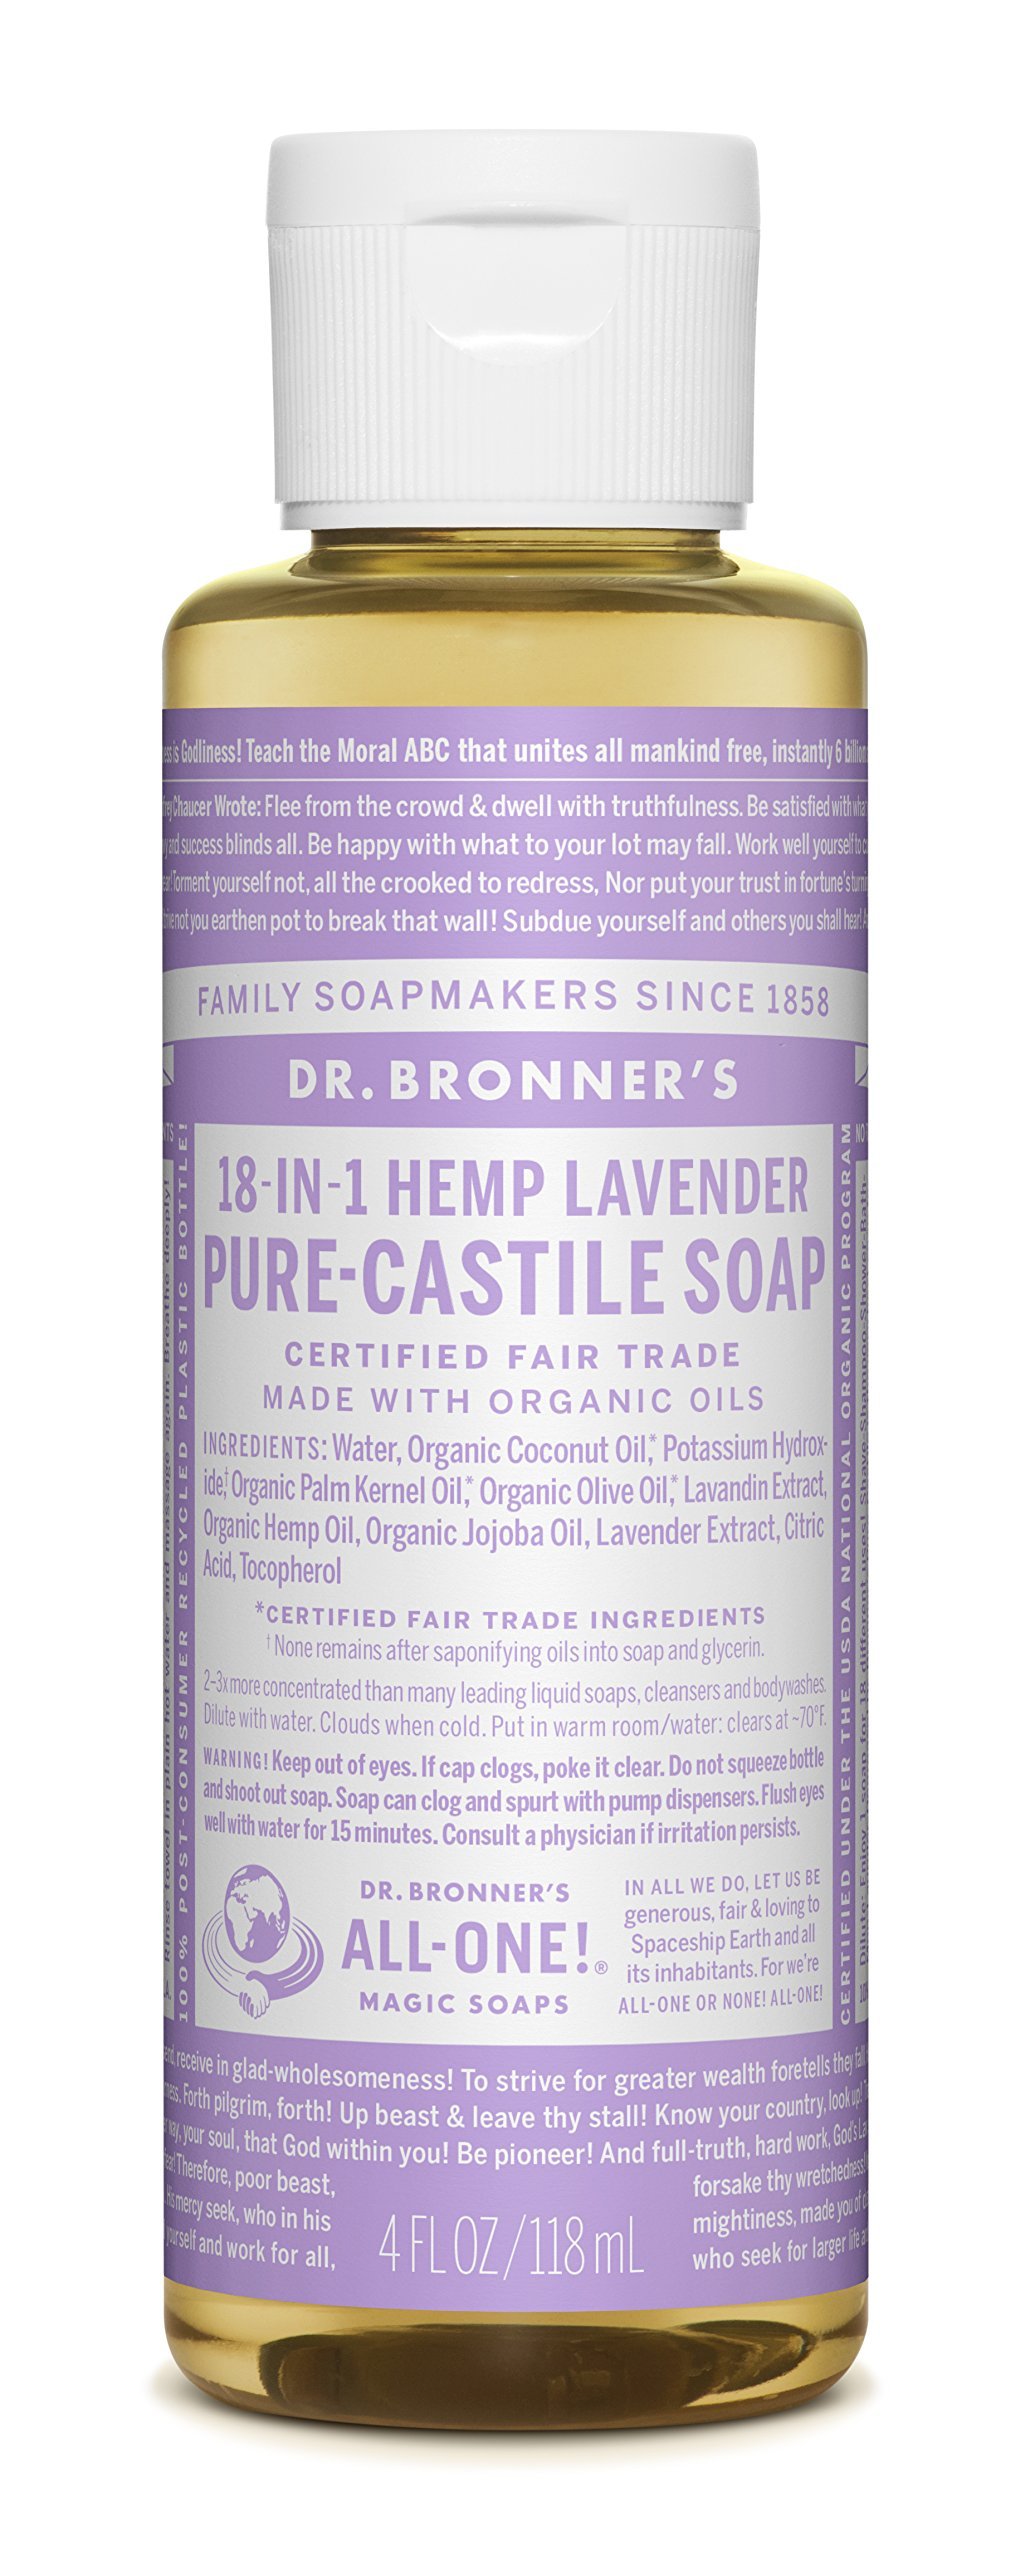 Dr. Bronner’s - Pure-Castile Liquid Soap (Lavender, 4 ounce) - Made with Organic Oils, 18-in-1 Uses: Face, Body, Hair, Laundry, Pets and Dishes, Concentrated, Vegan, Non-GMO